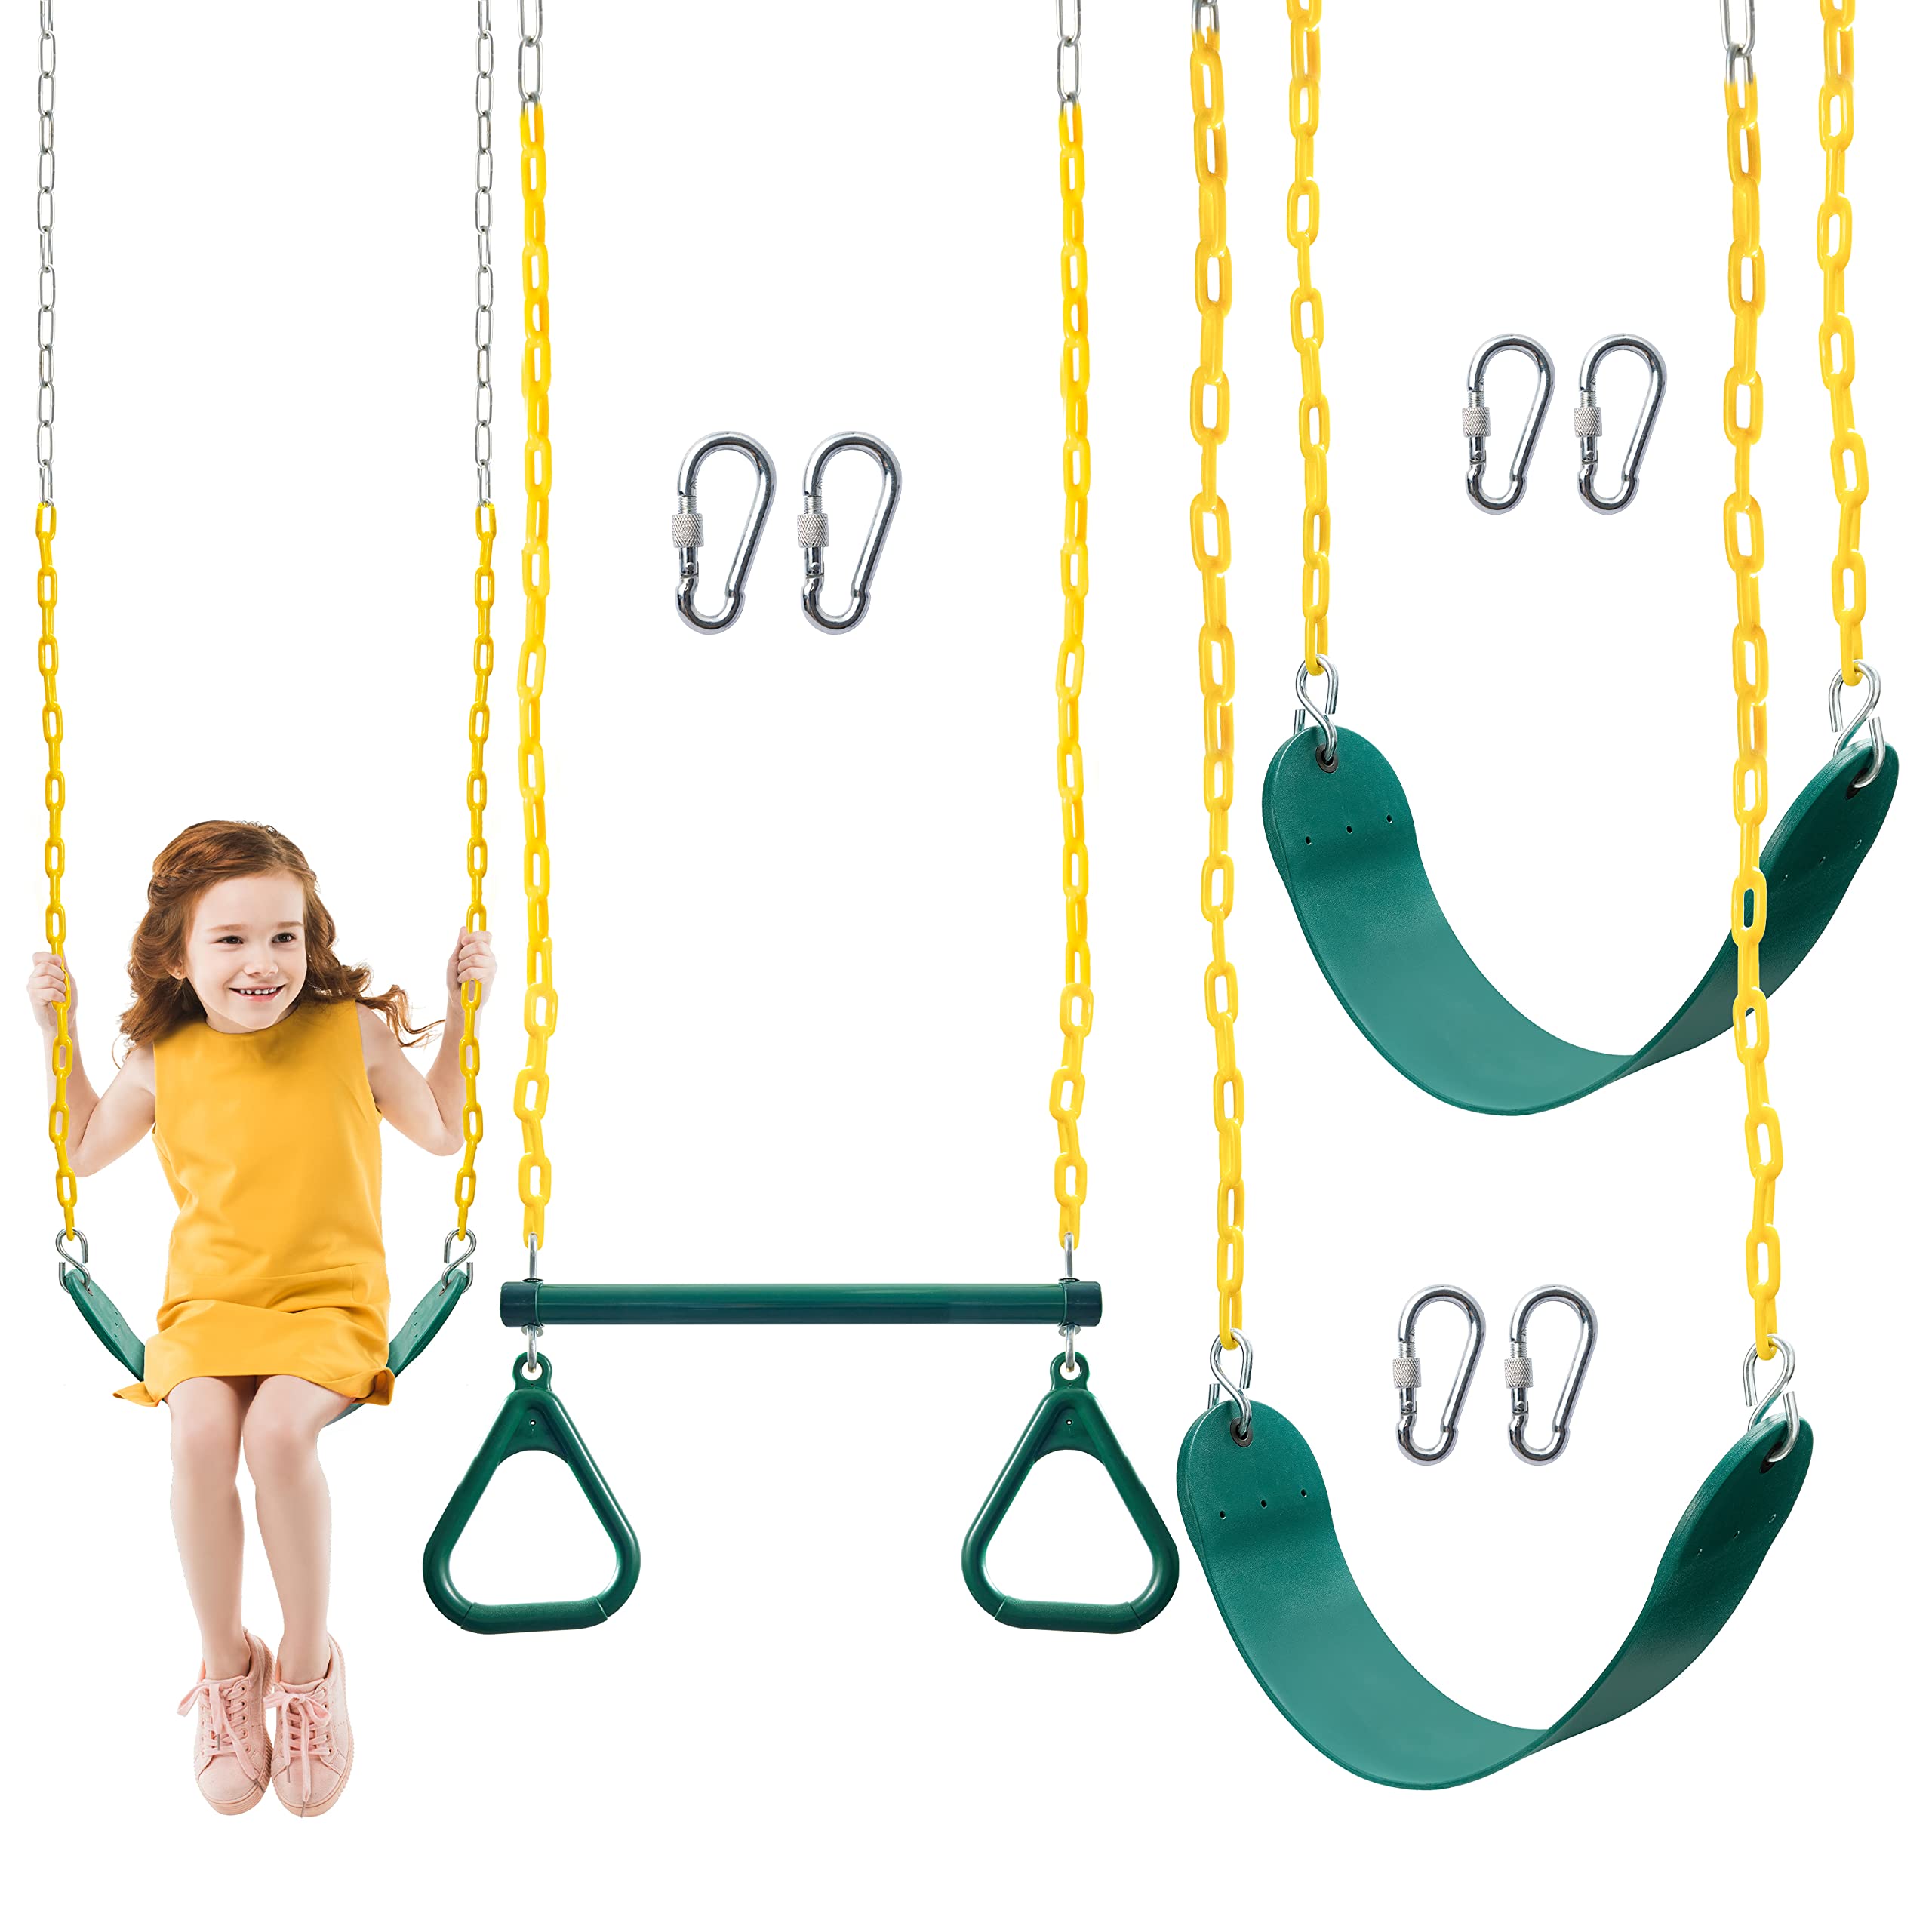 TURFEE 3 Pack Assorted Swing Set, Including 1 Gym Rings Trapeze Swing Bar and 2 Pcs Swings with Plastic Coated Chain, Swing Set Accessories Replacement for Kids Outdoor Play, Playground- Green